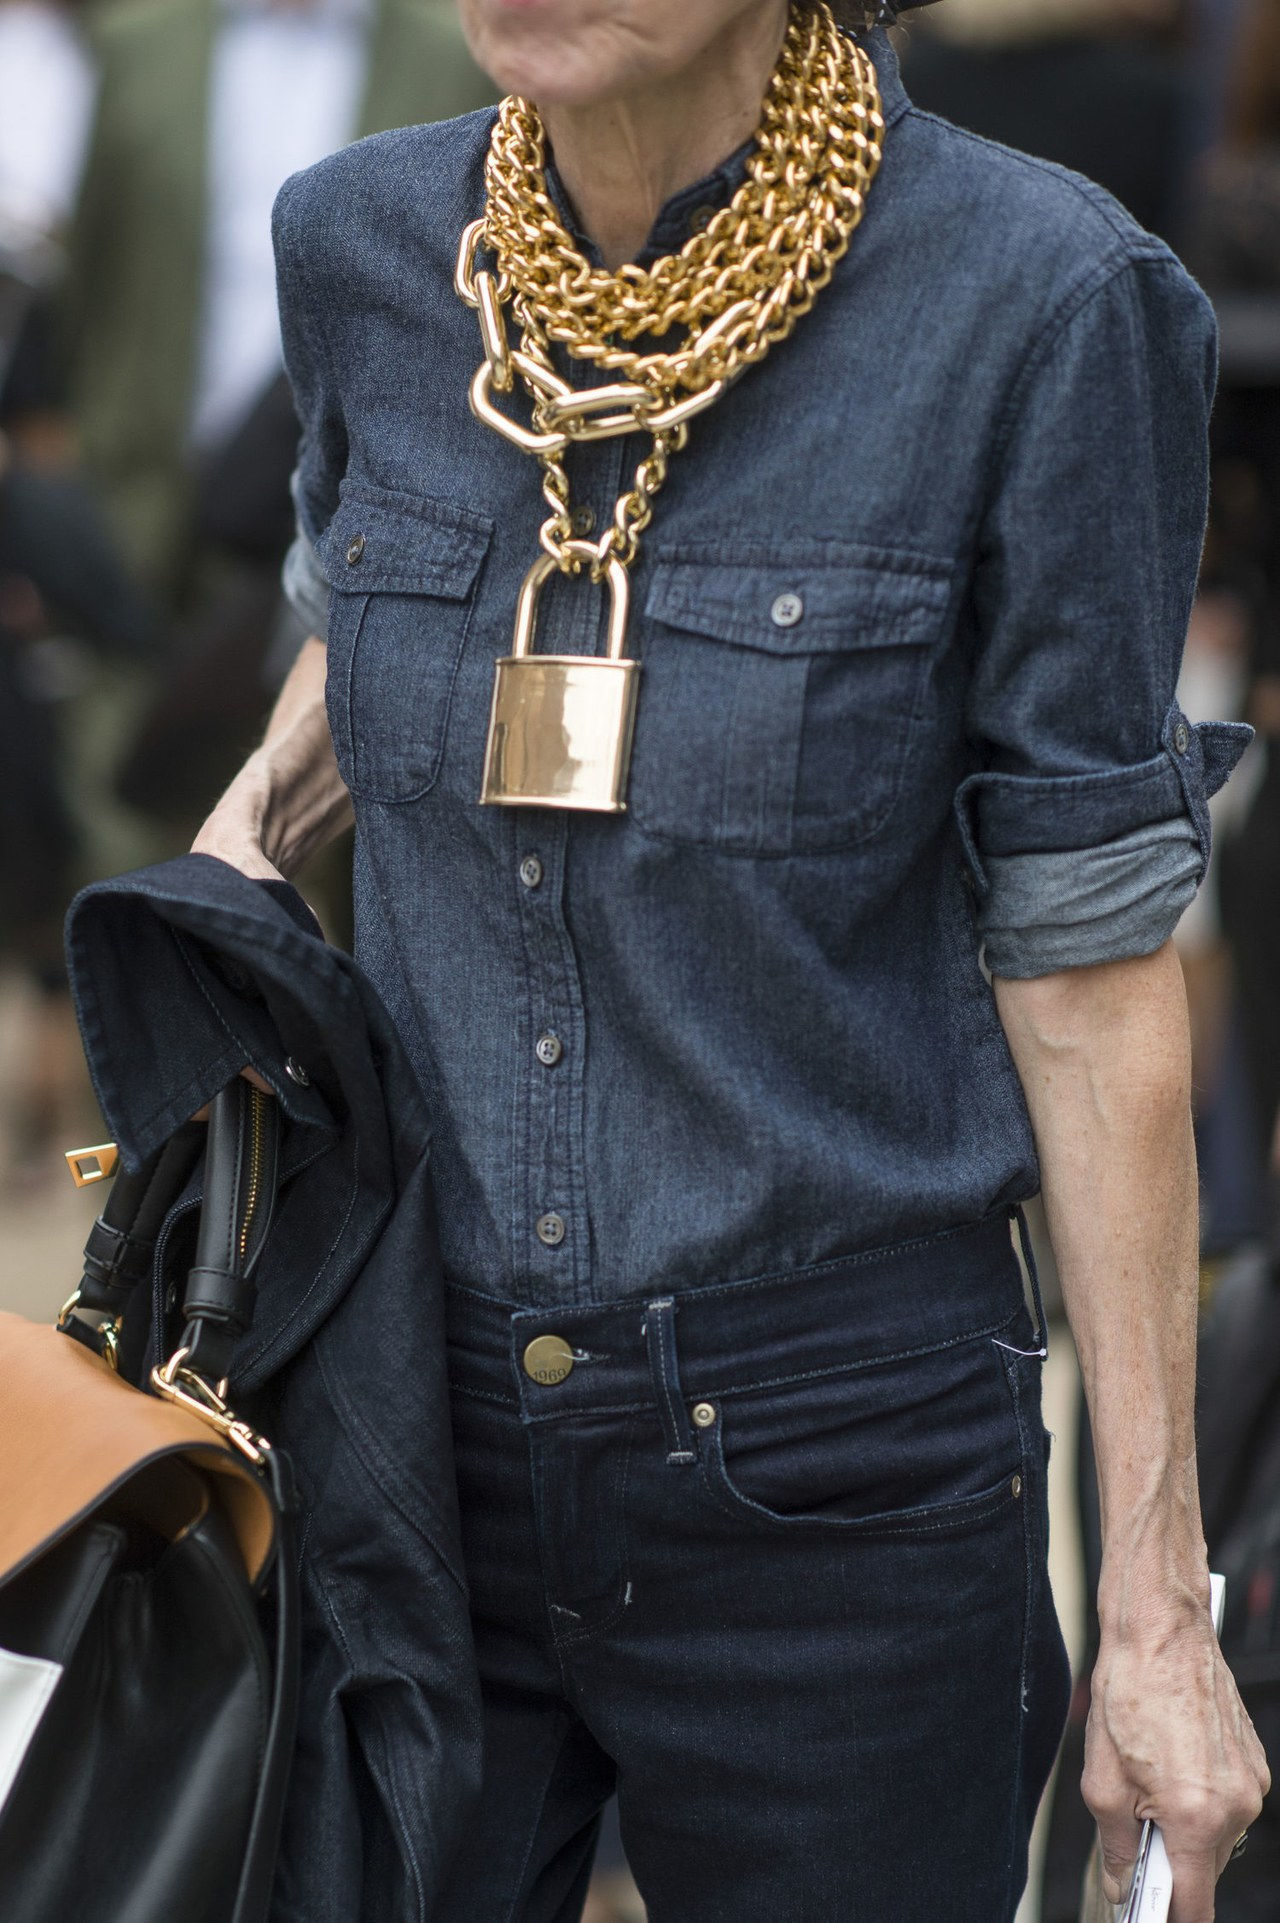 grueso gold chain necklace street style